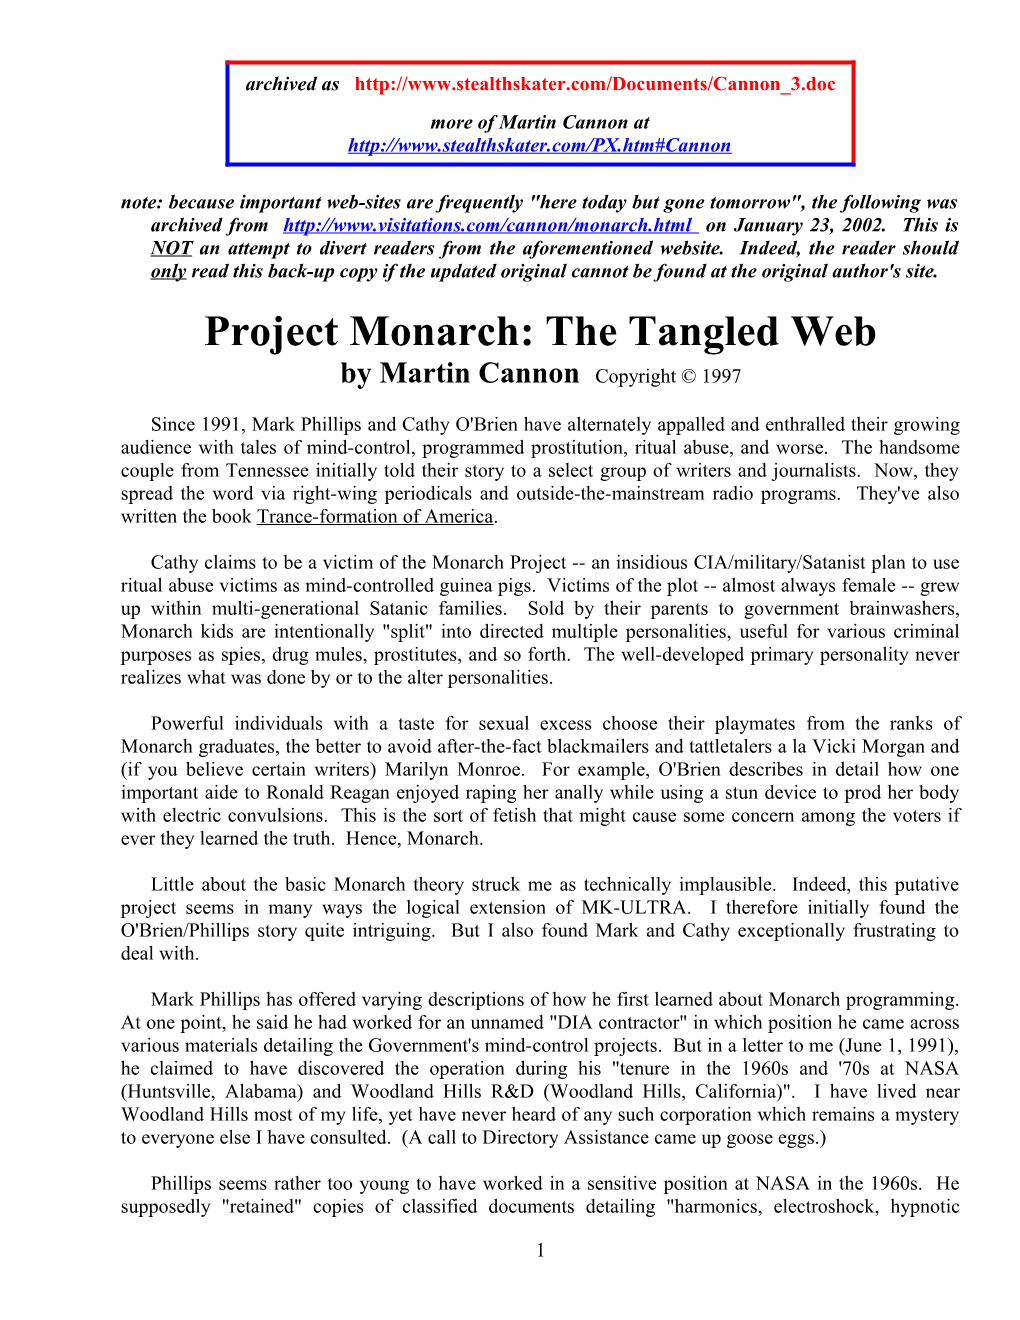 Project Monarch: the Tangled Web